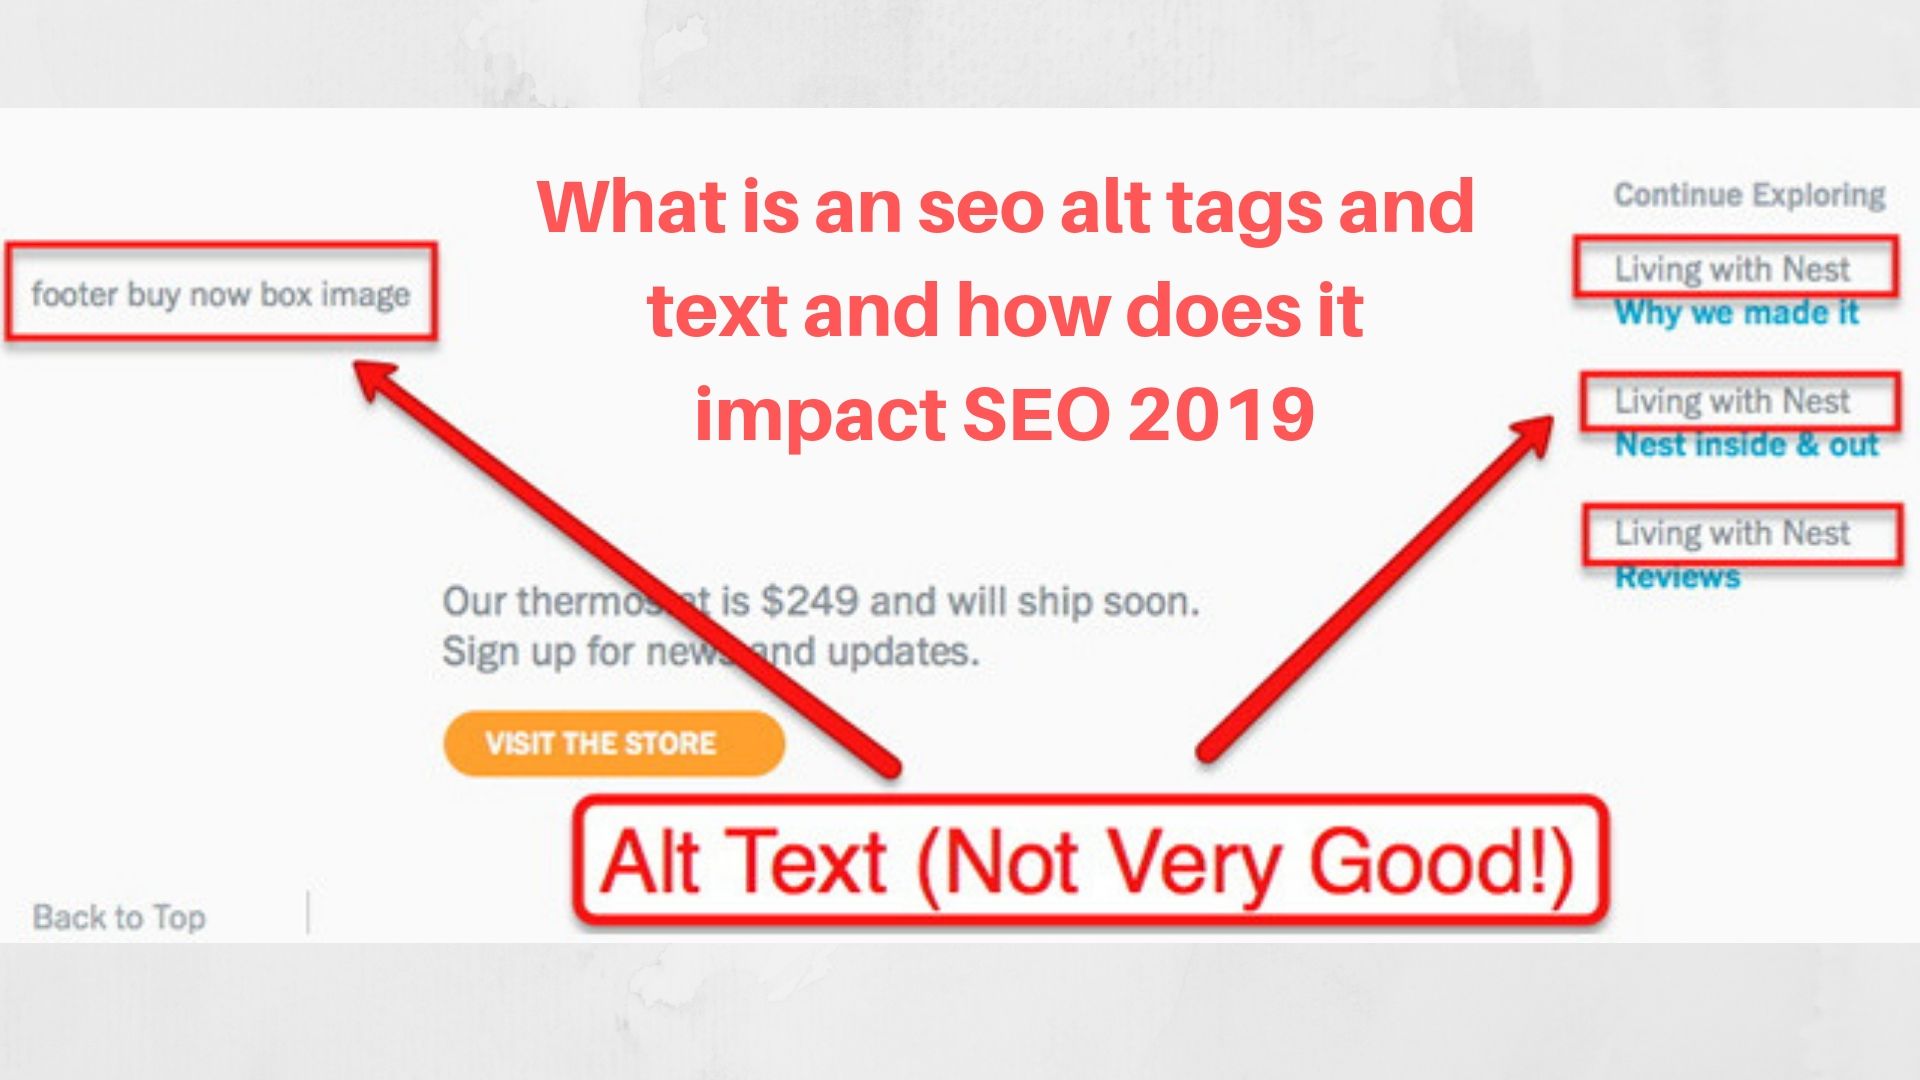 What is an seo alt tags and text and how does it impact SEO 2019